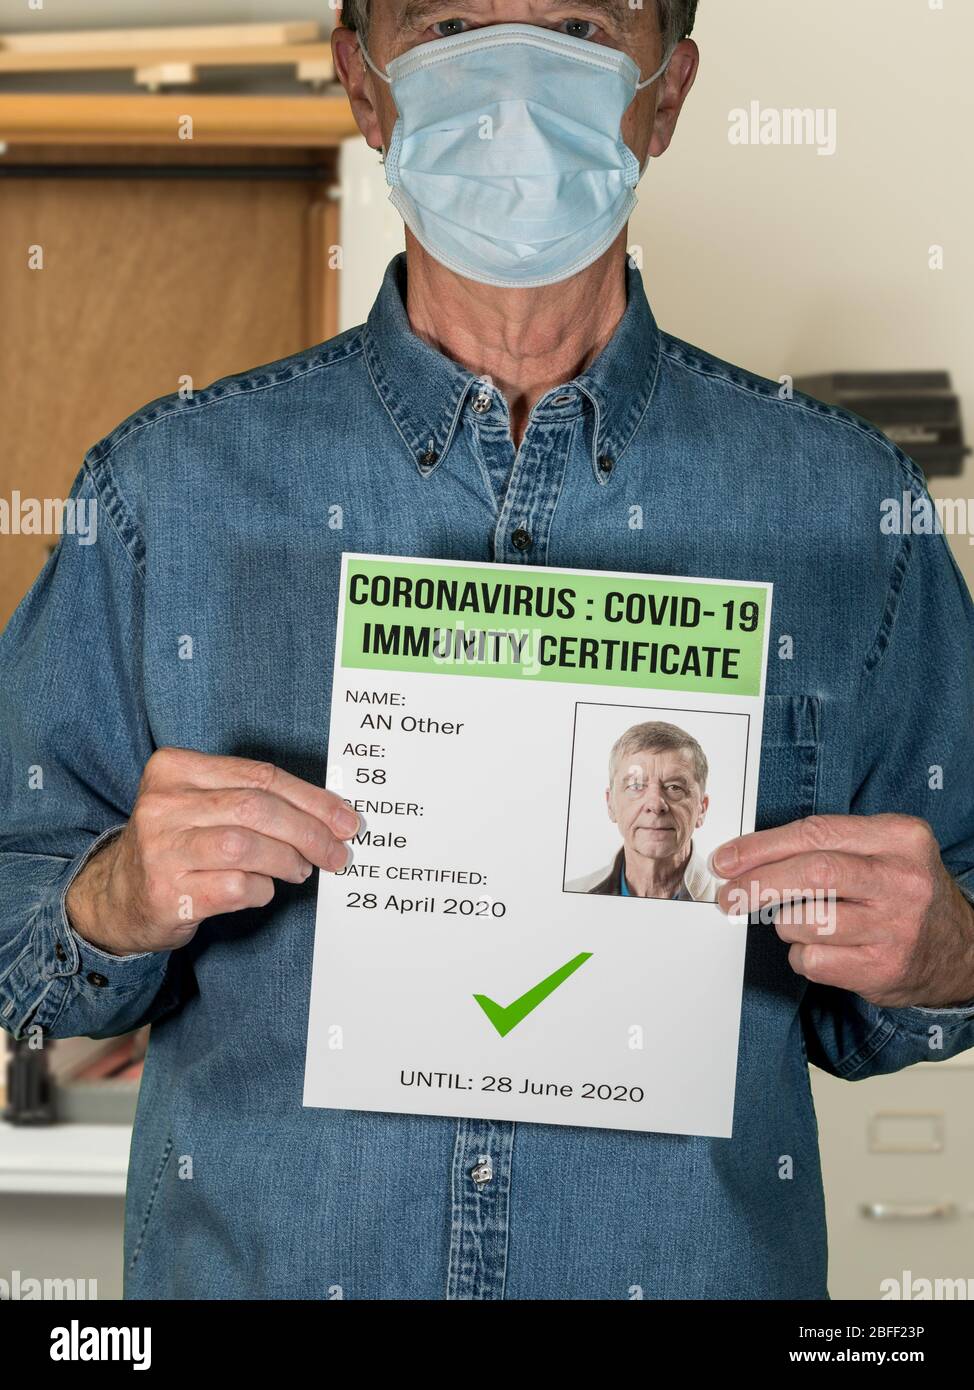 Male blue collar worker concept of immunity testing and certification to allow people to go back to work after negative test Stock Photo